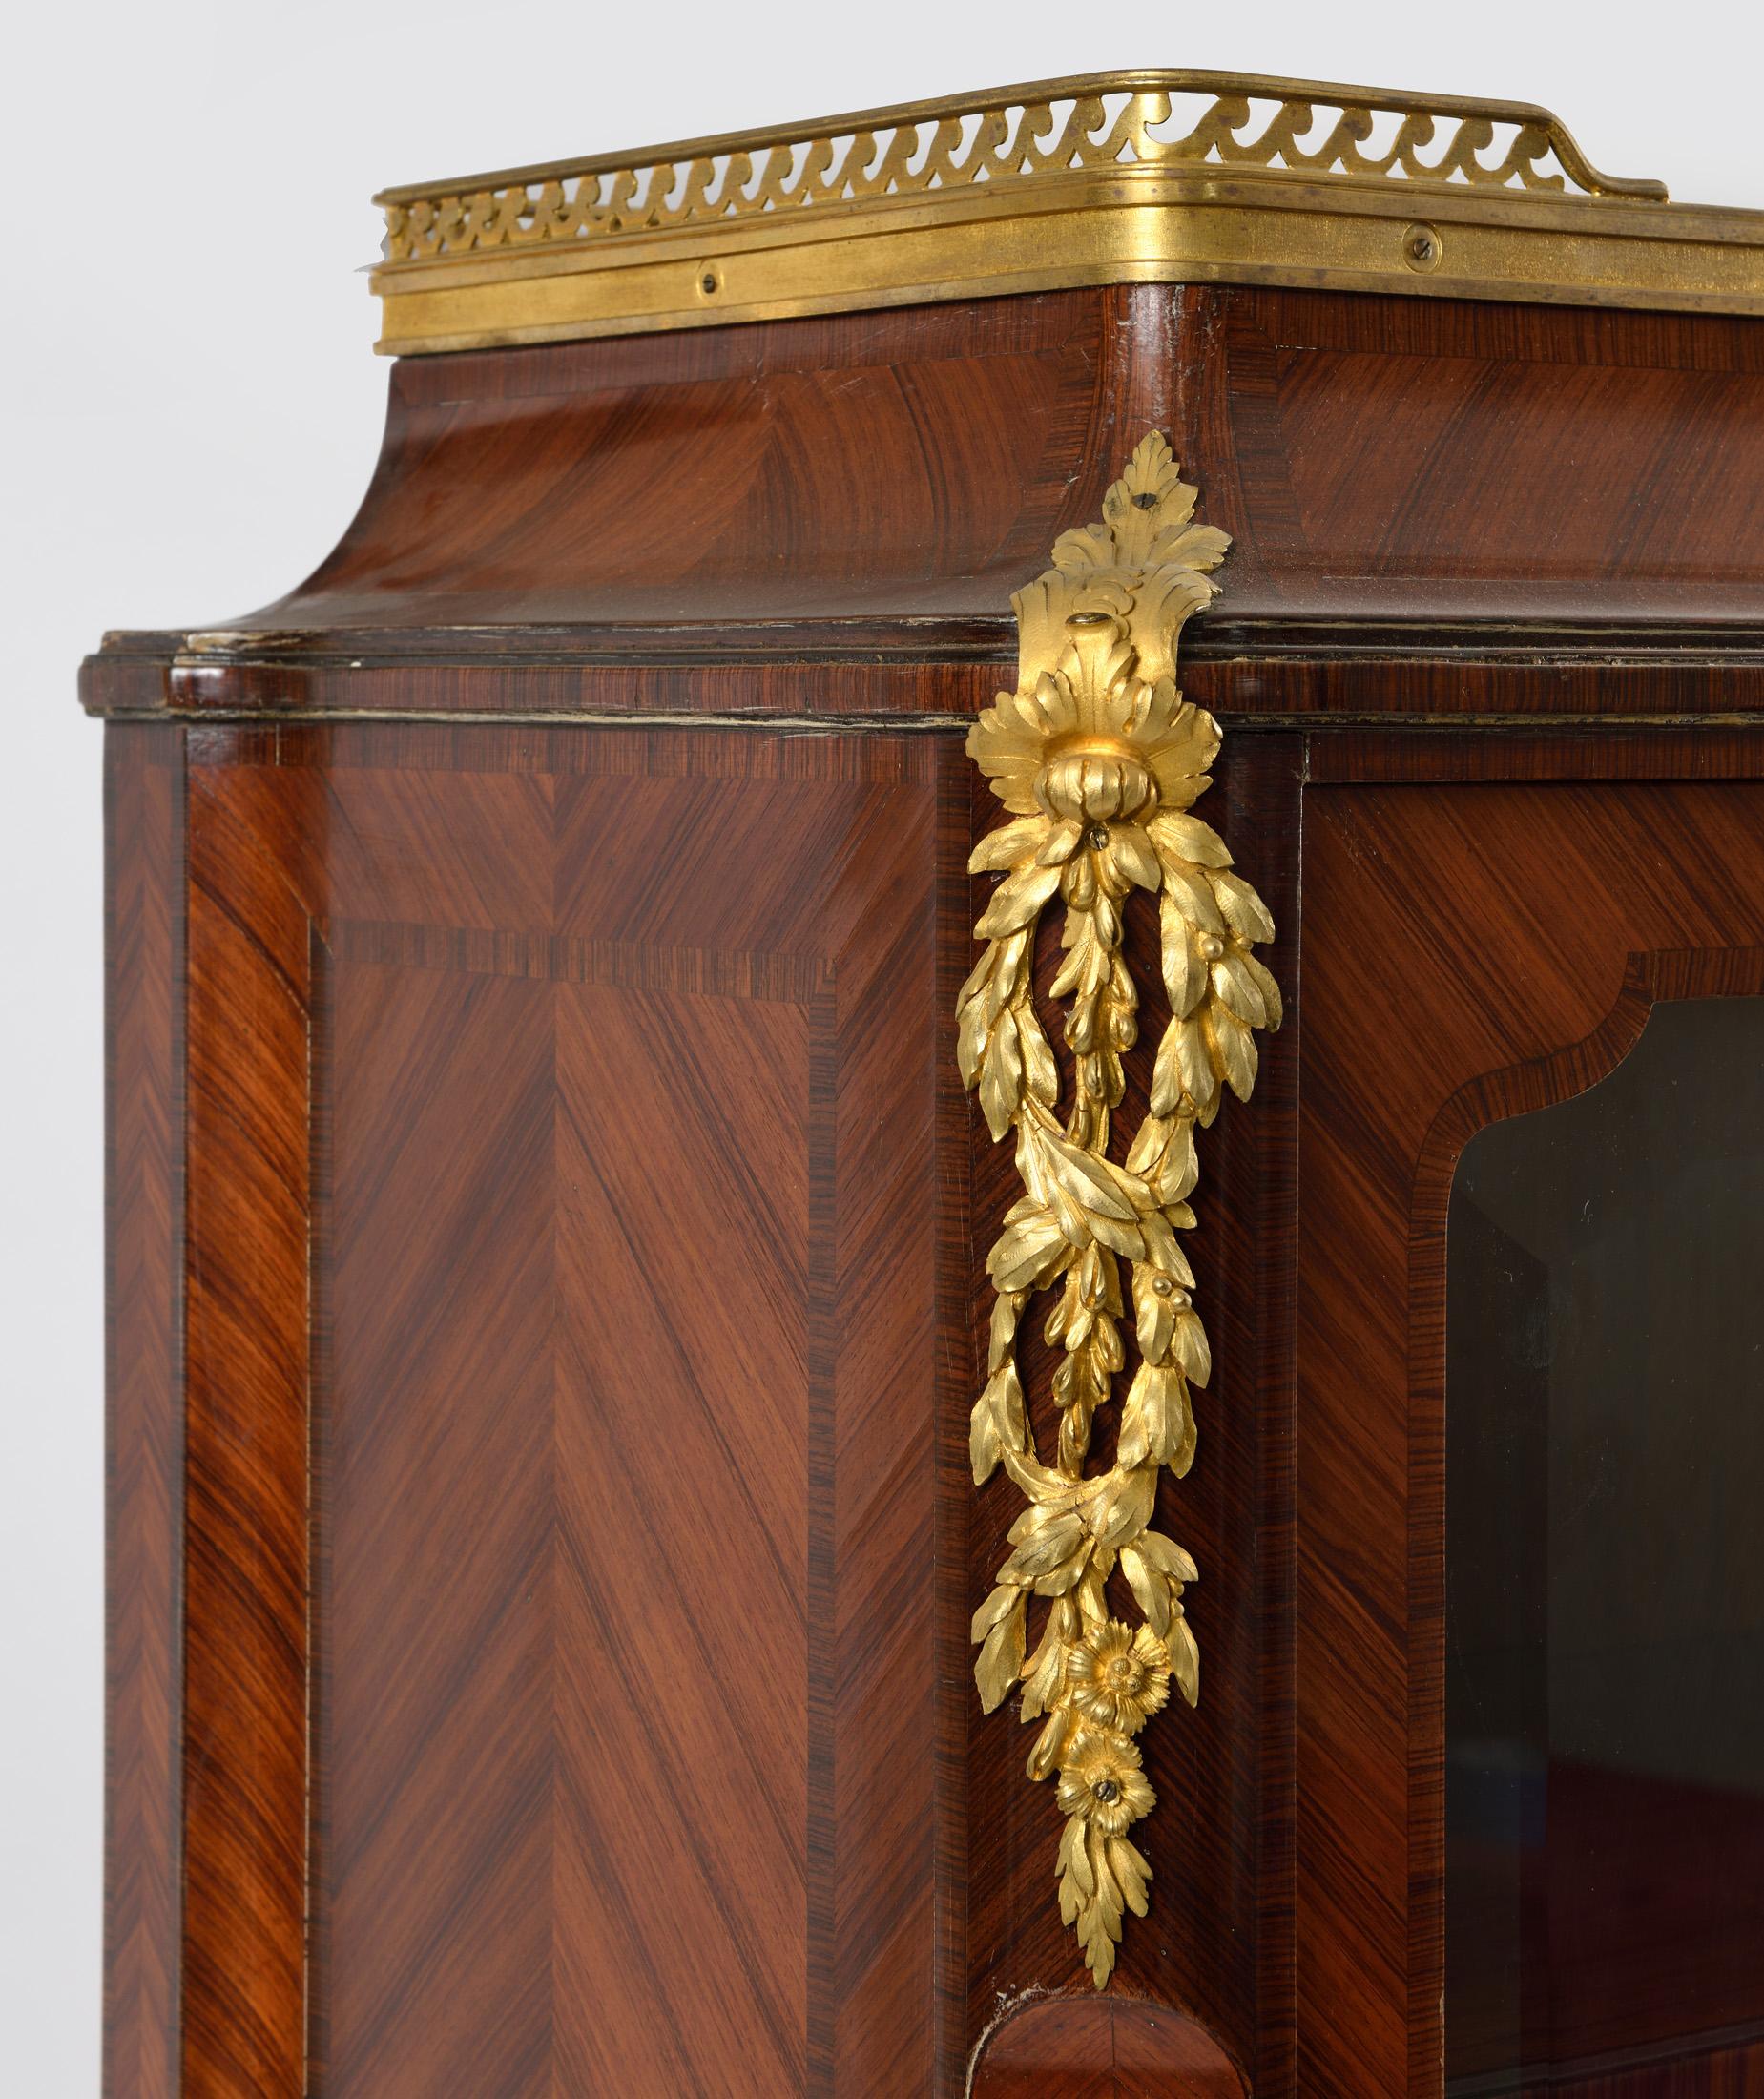 Superb furniture in marquetry and bronze in the louis XV louis XVI transition style
executed by A.Chevrie famous parisian cabinetmaker of this time.
The furniture at the top opens with two glass door, inside two sheleves to expose books or objects